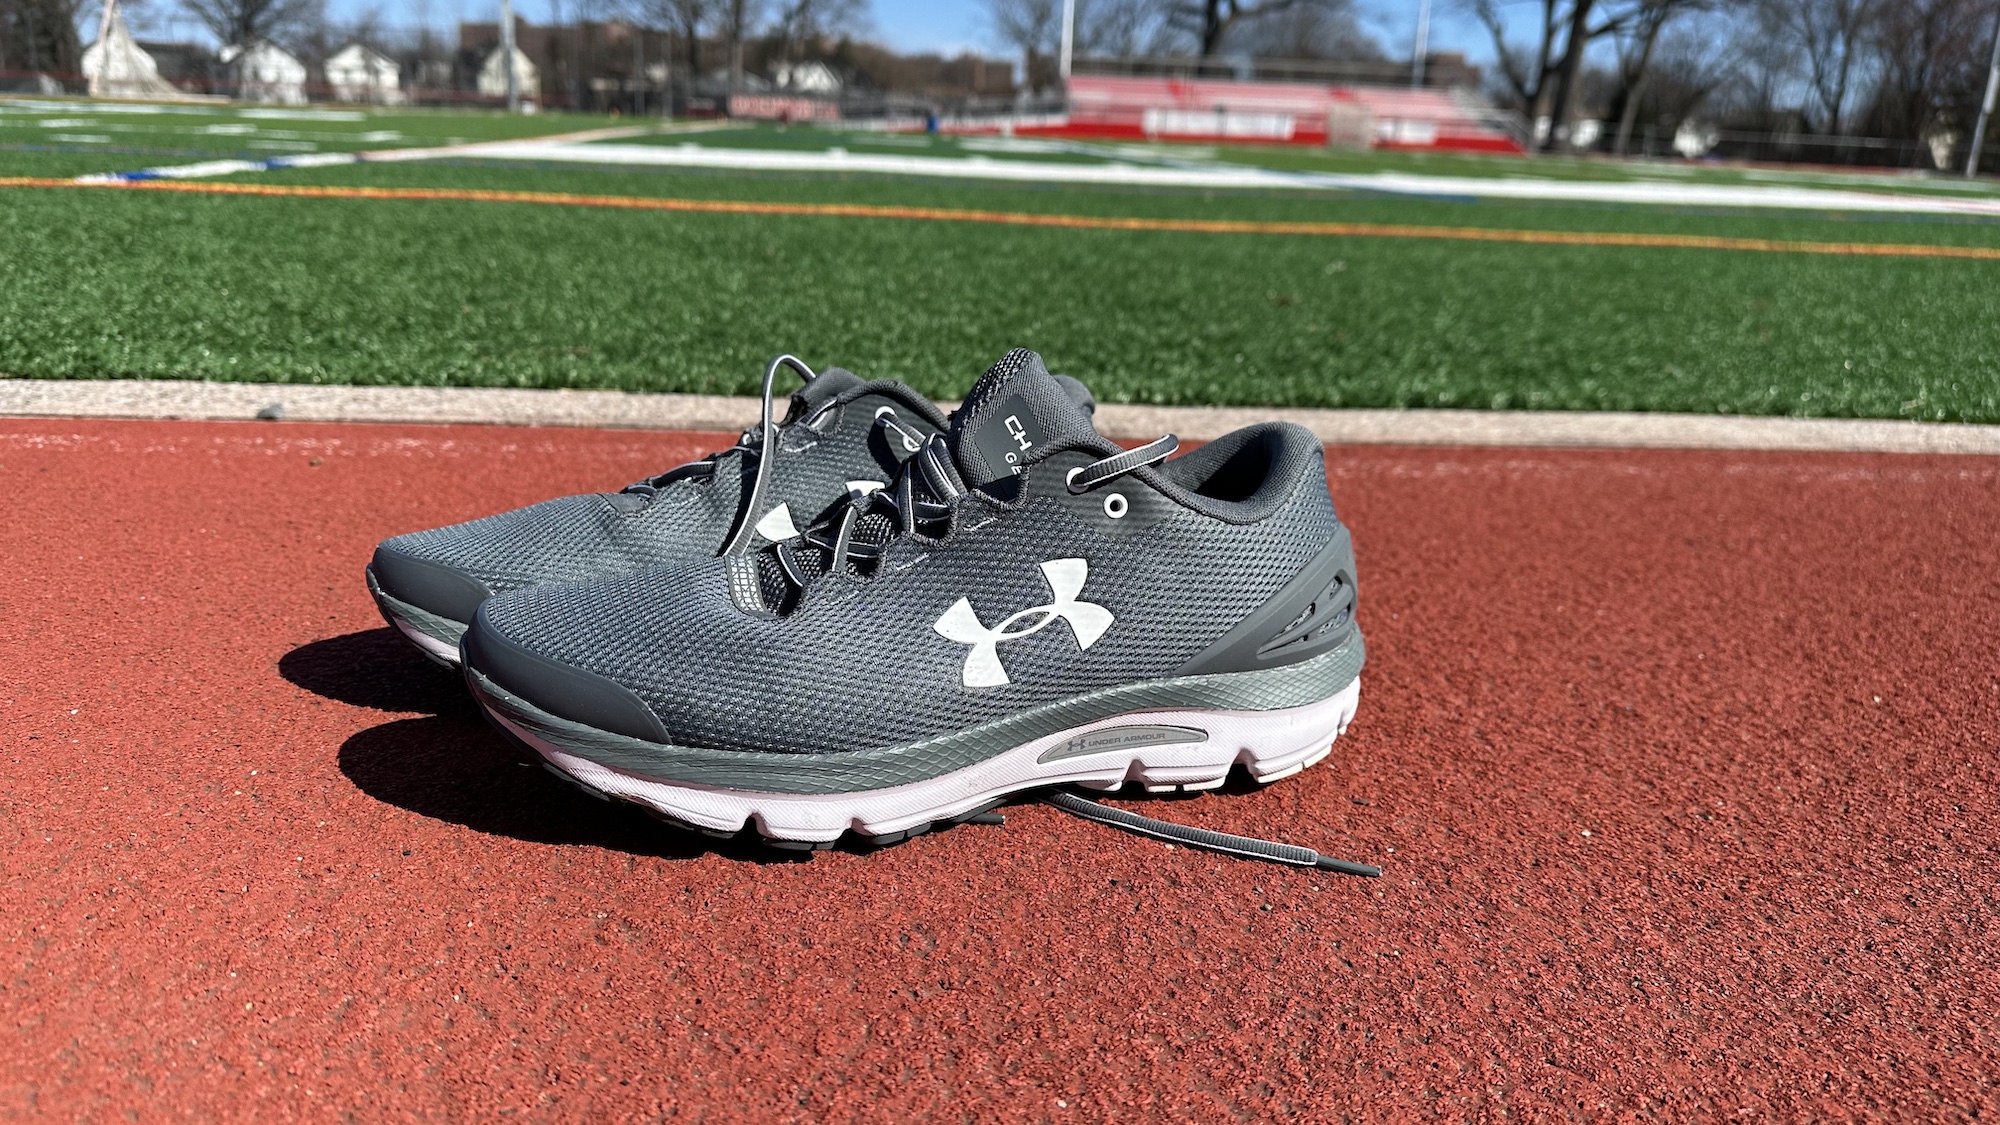 Rey Lear Pantera Reflexión Under Armour Charged Gemini review | Tom's Guide